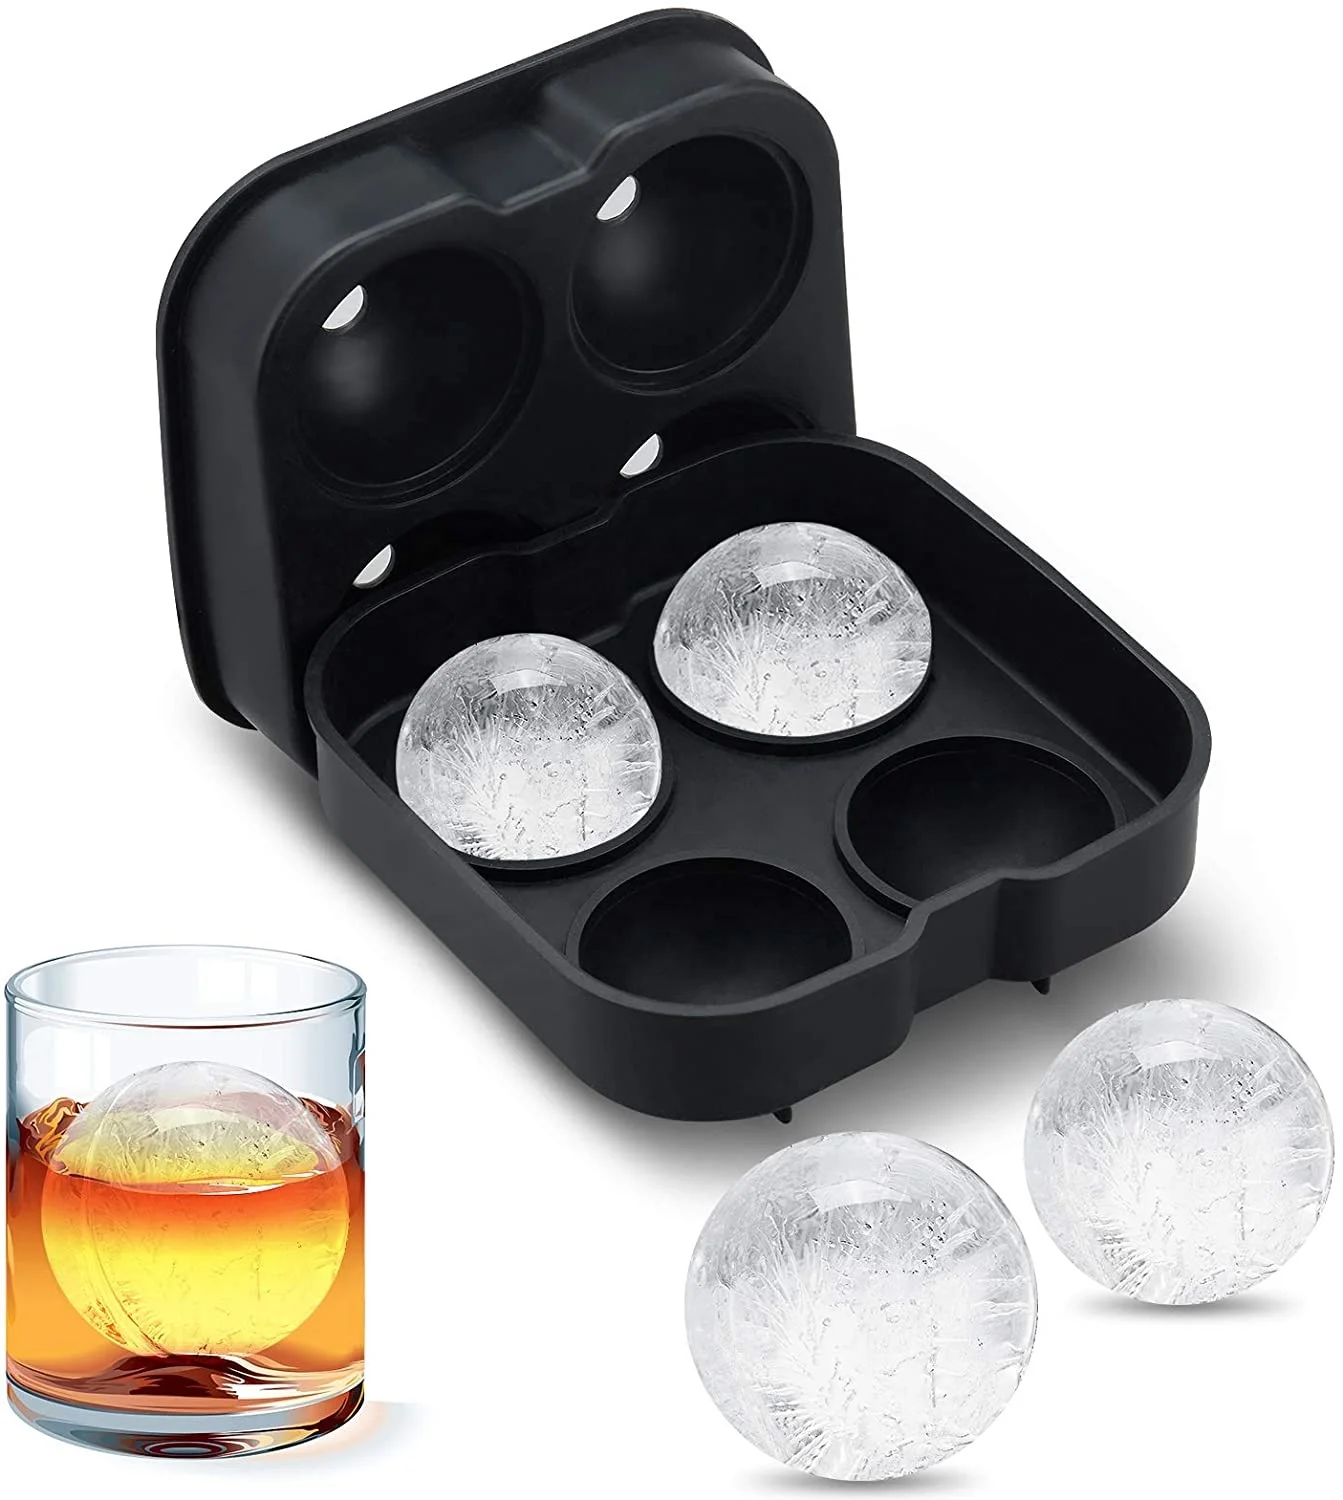 

Custom Design Large Bpa Free Food Grade Silicone Sphere Ice Moulds Ball Molds Ice Cube Trays, Red,black,blue,grey